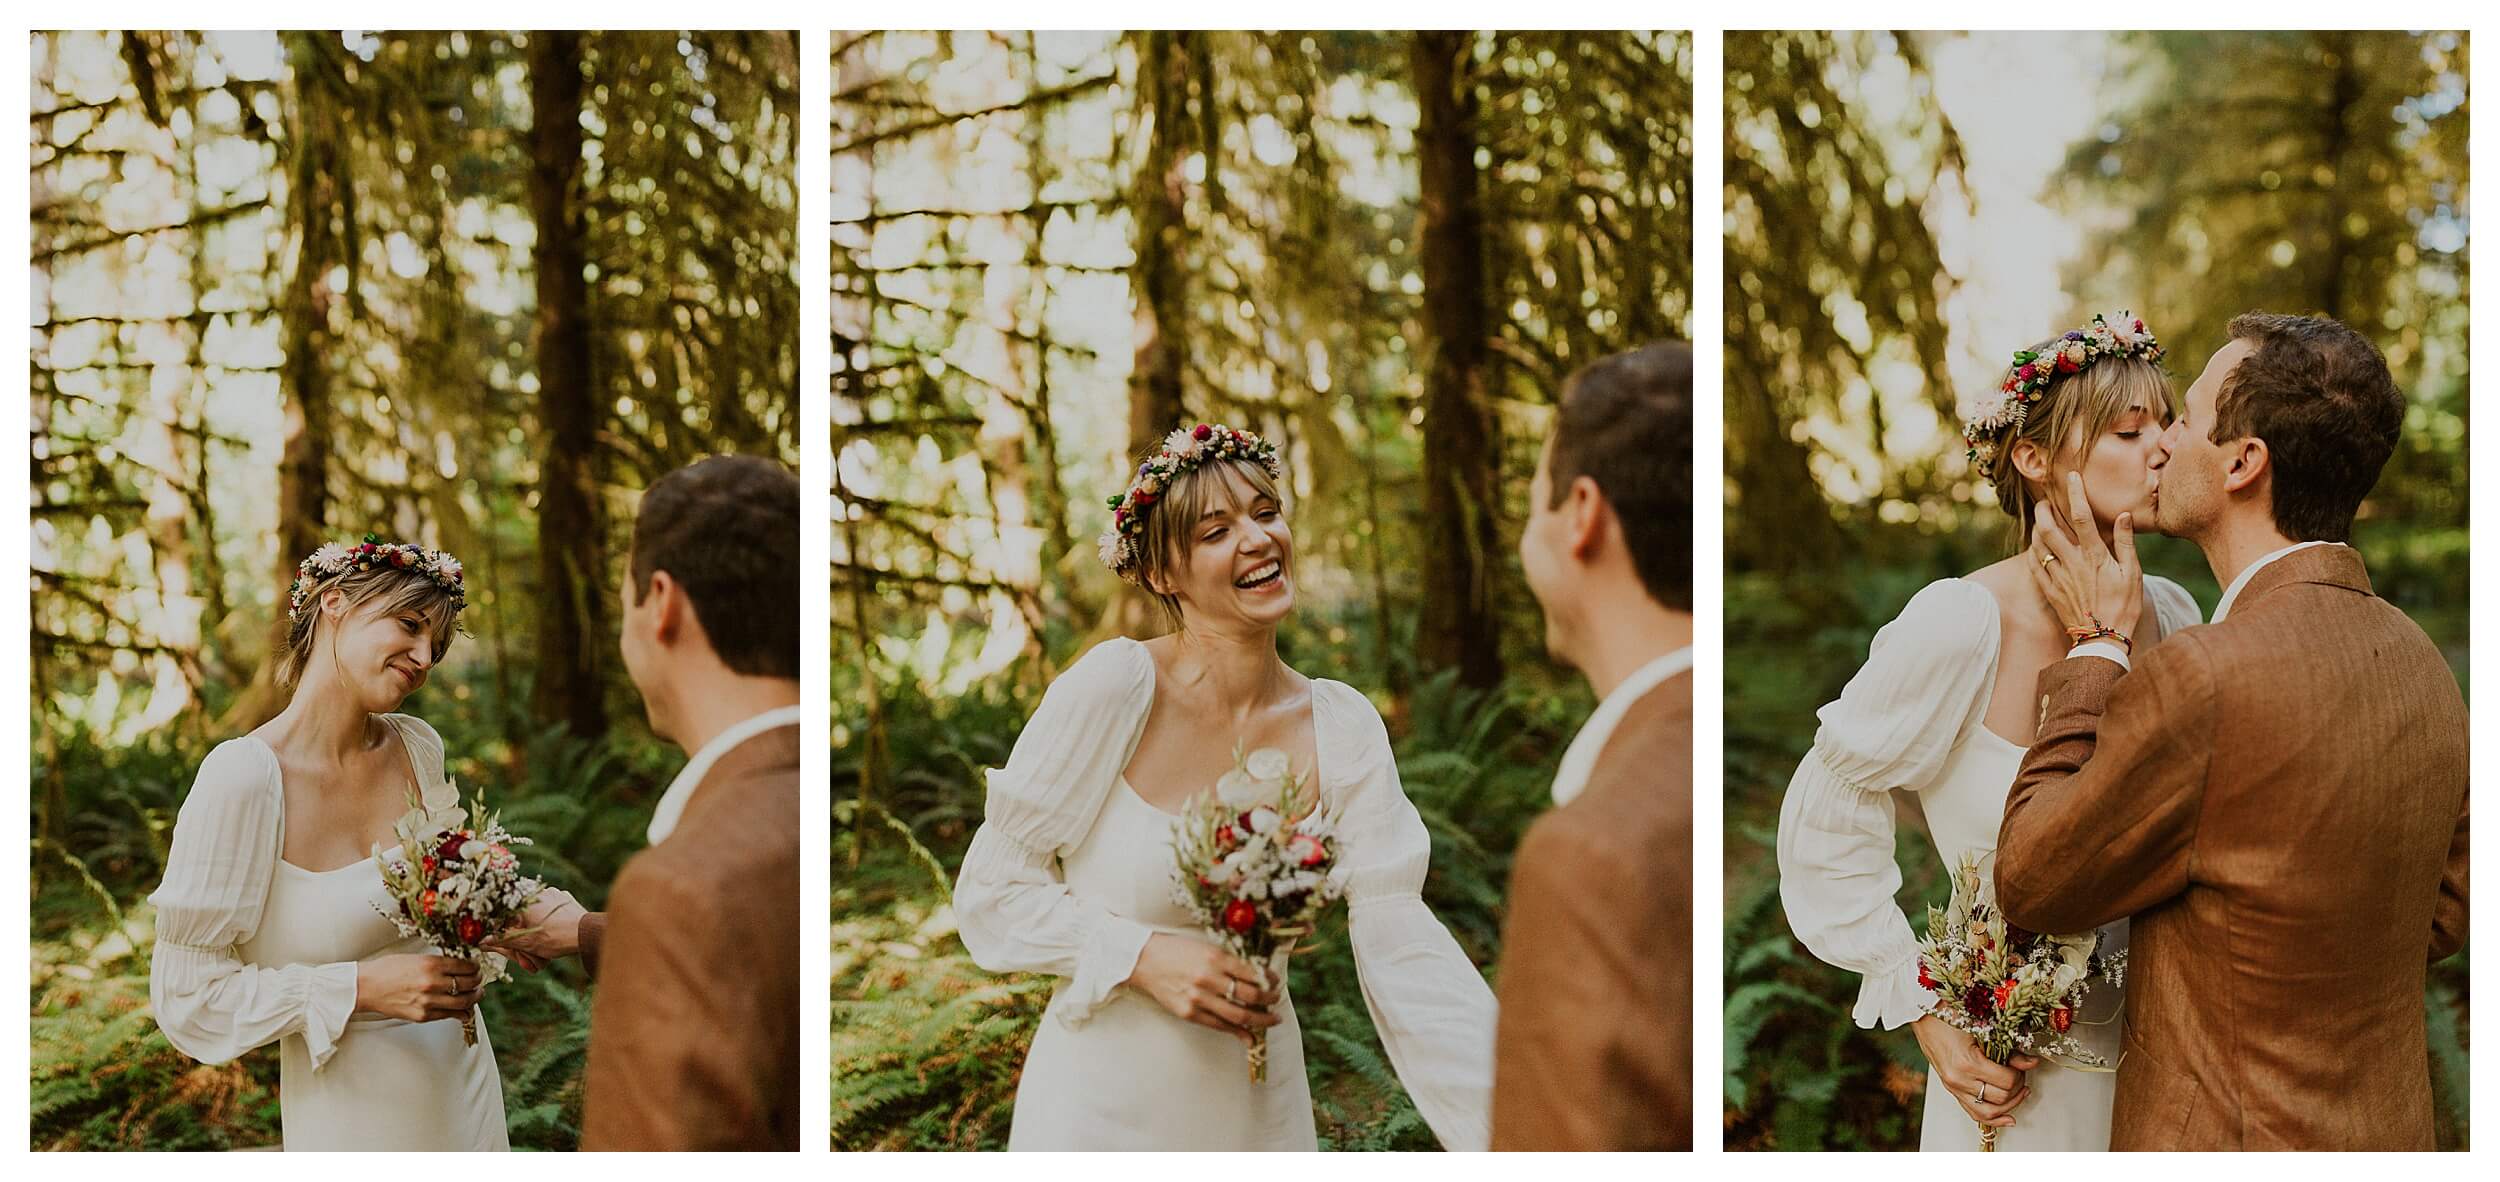 bride and groom kissing hoh rainforest

